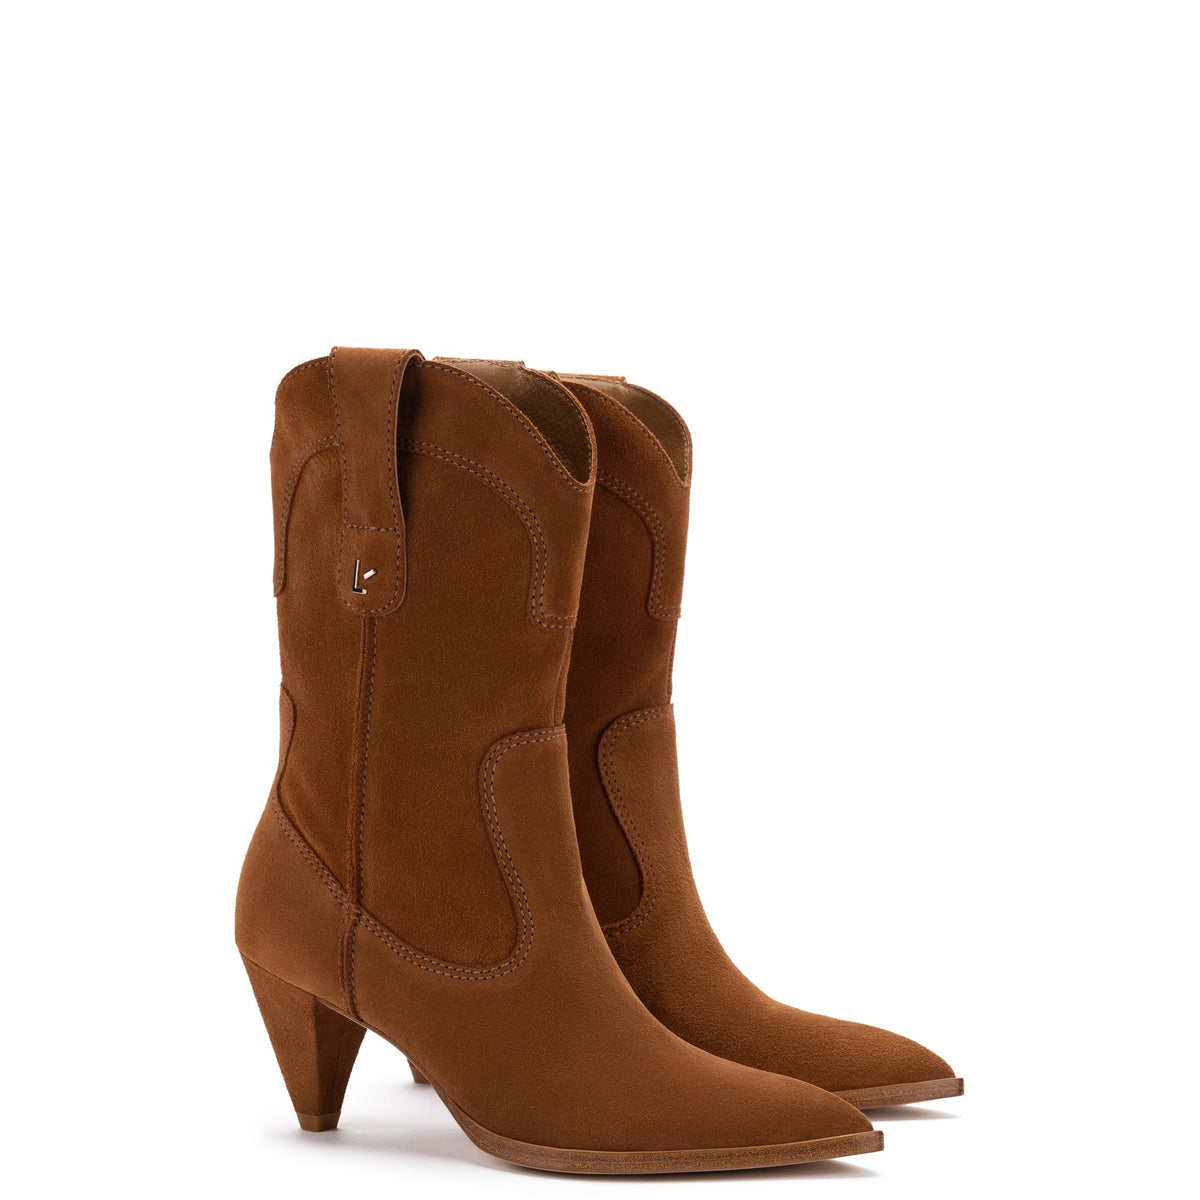 Thelma Boot in Tobacco